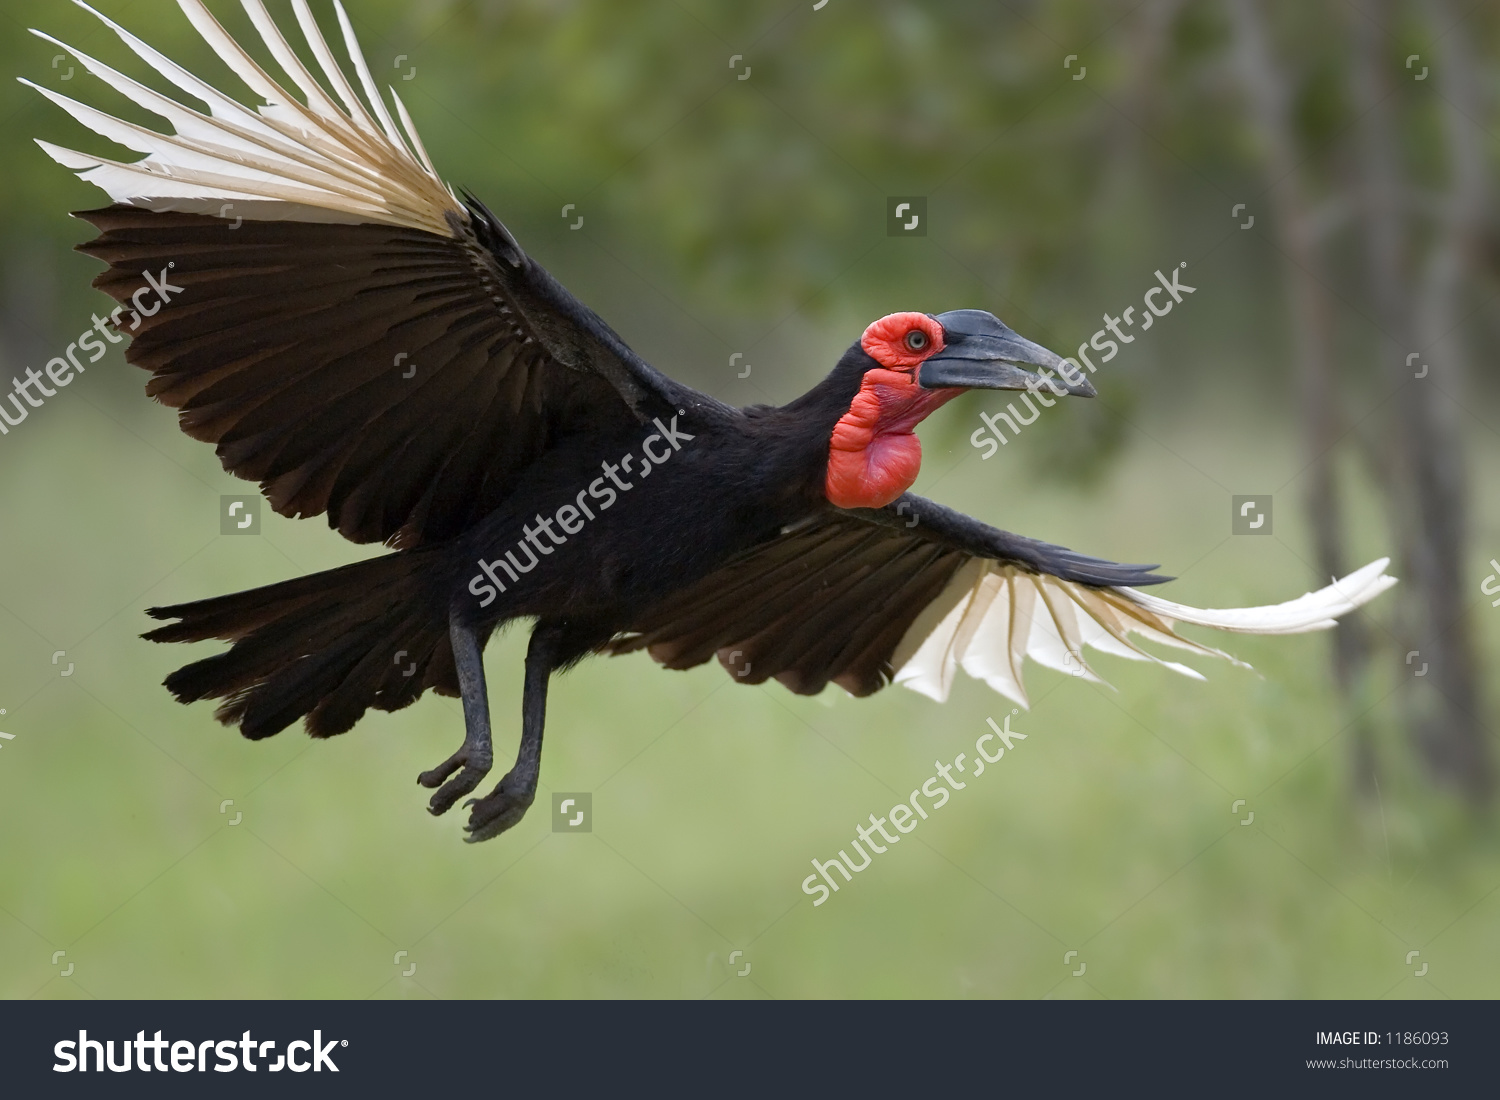 Southern Ground Hornbill clipart #12, Download drawings